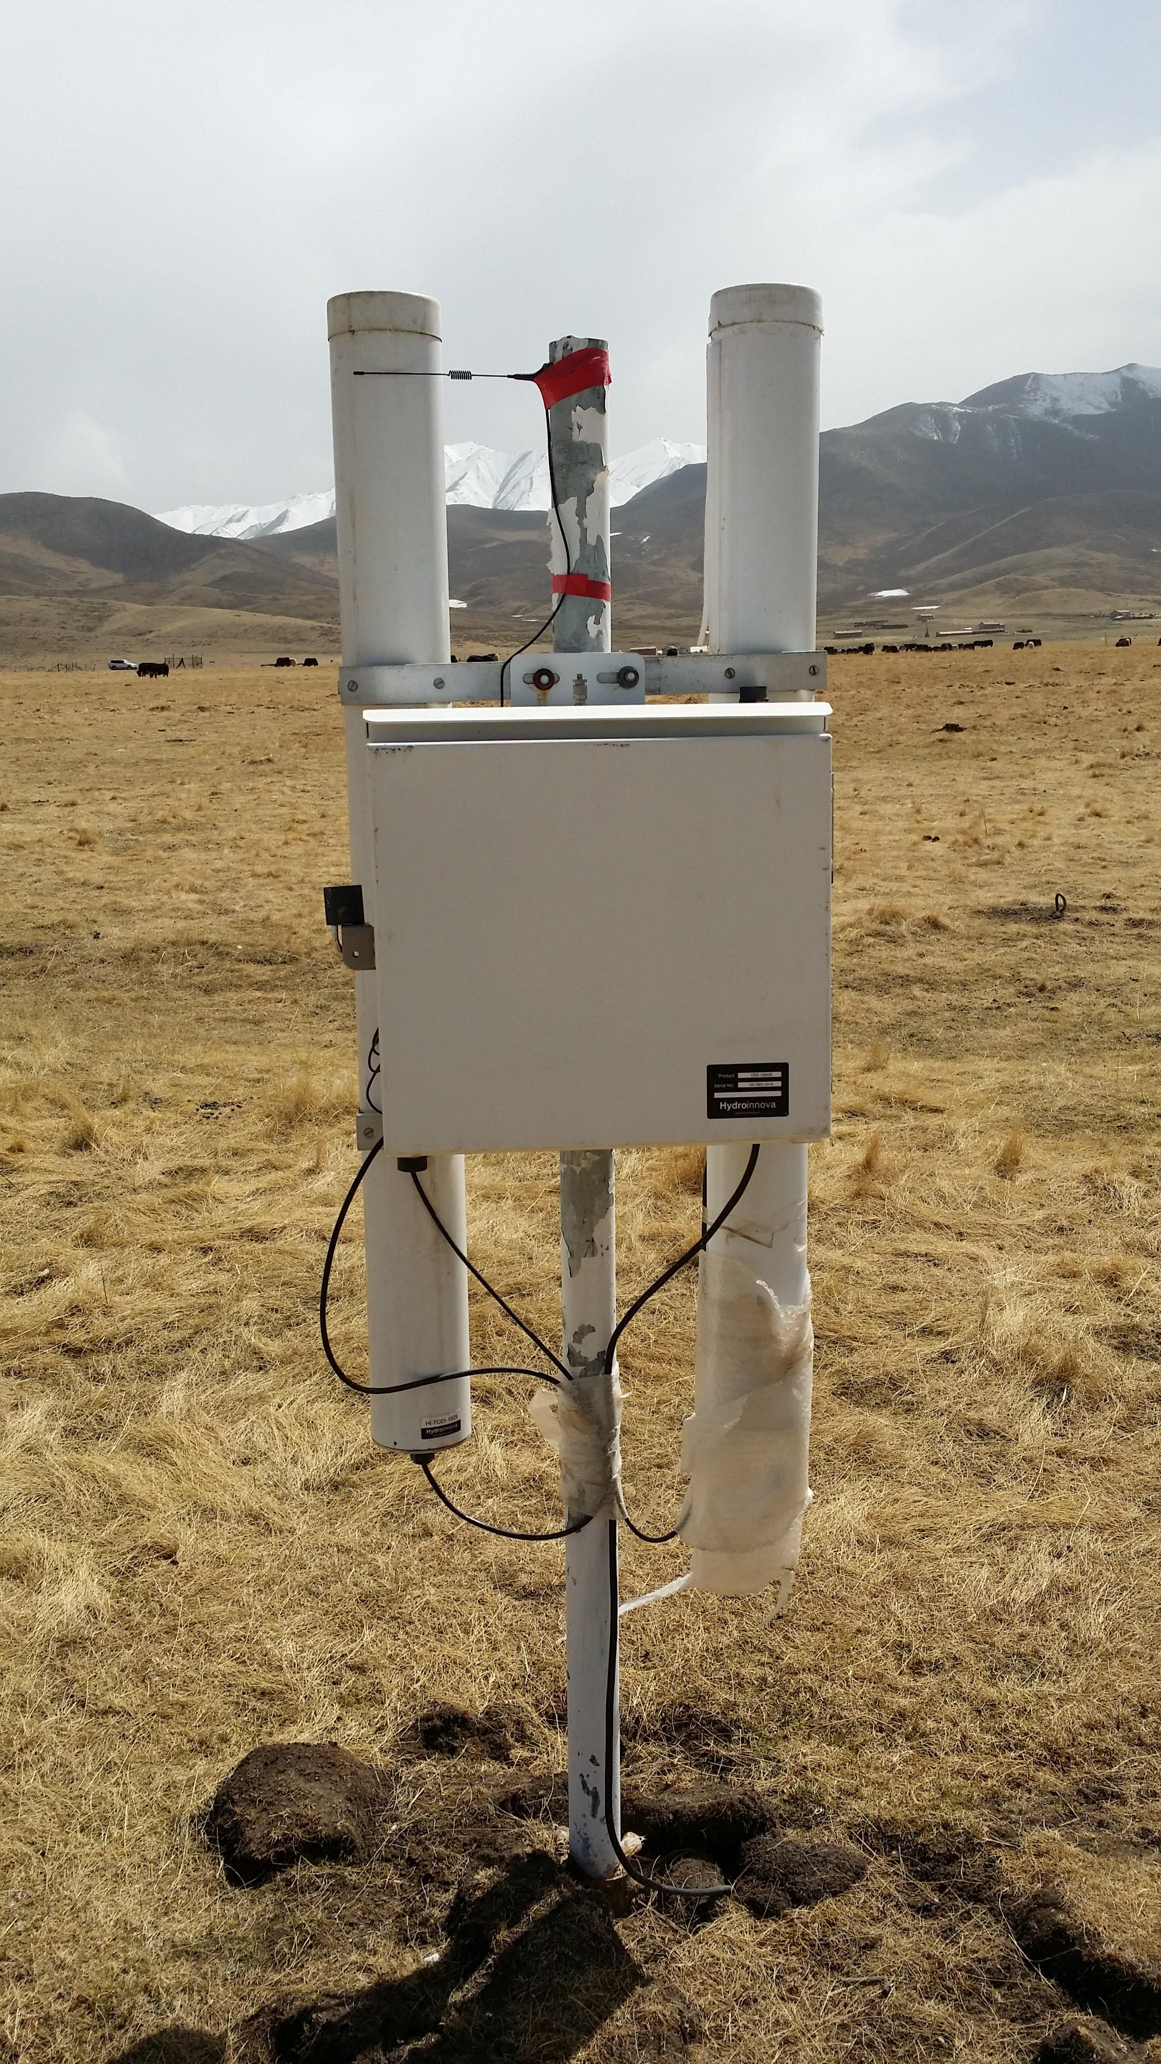 Qilian Mountains integrated observatory network: Dataset of Heihe integrated observatory network (Cosmic-ray observation system of soil moisture of Arou Superstation, 2021)